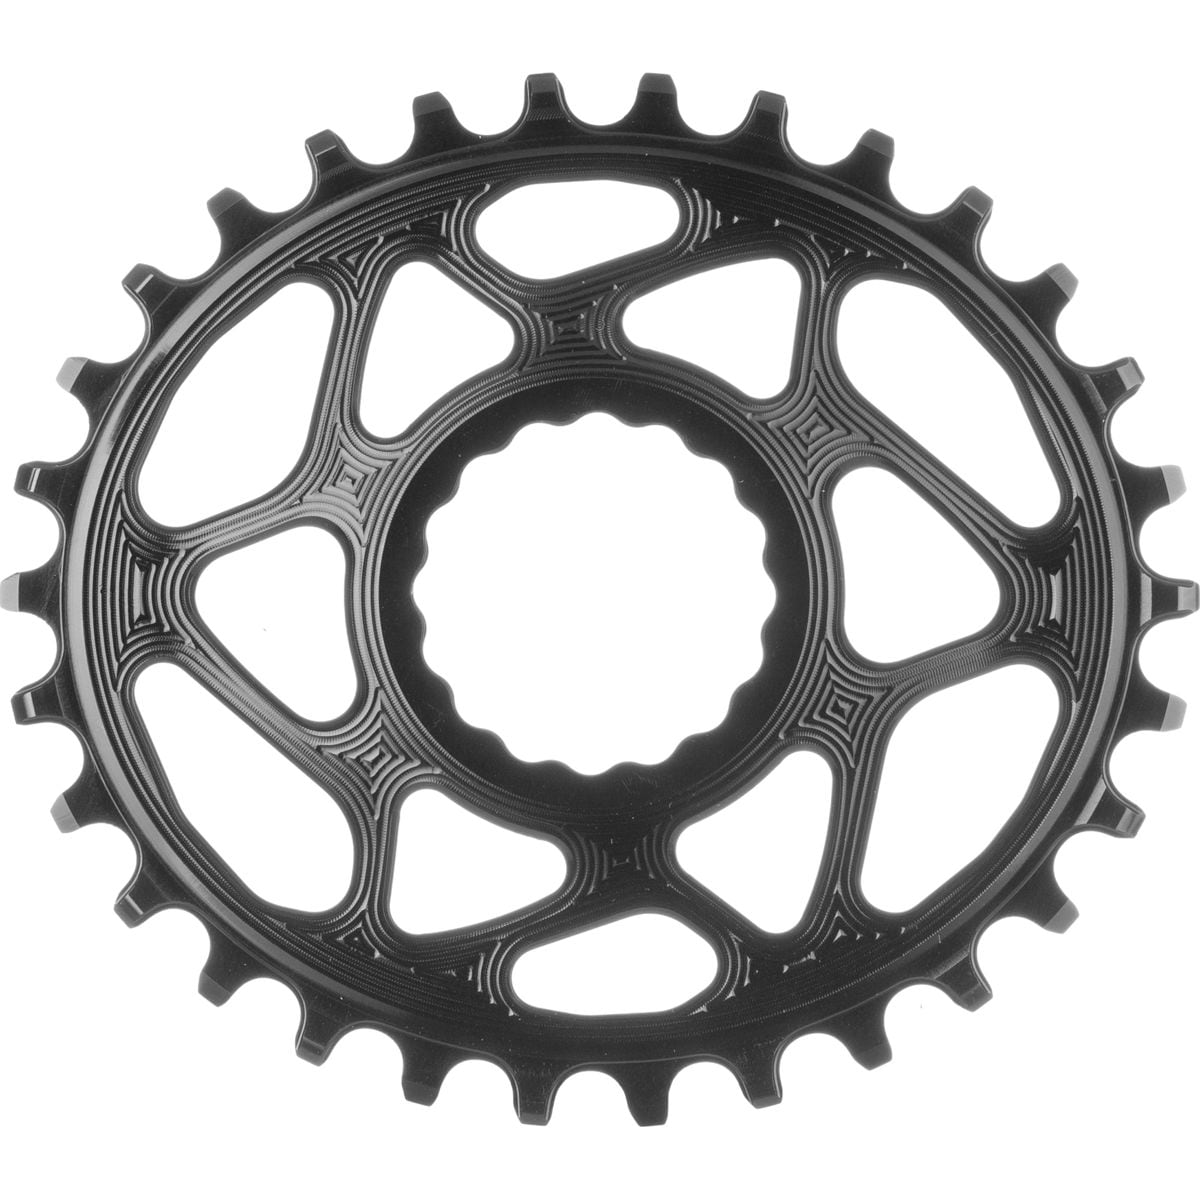 absoluteBLACK Race Face Oval Cinch Direct Mount Traction Chainring